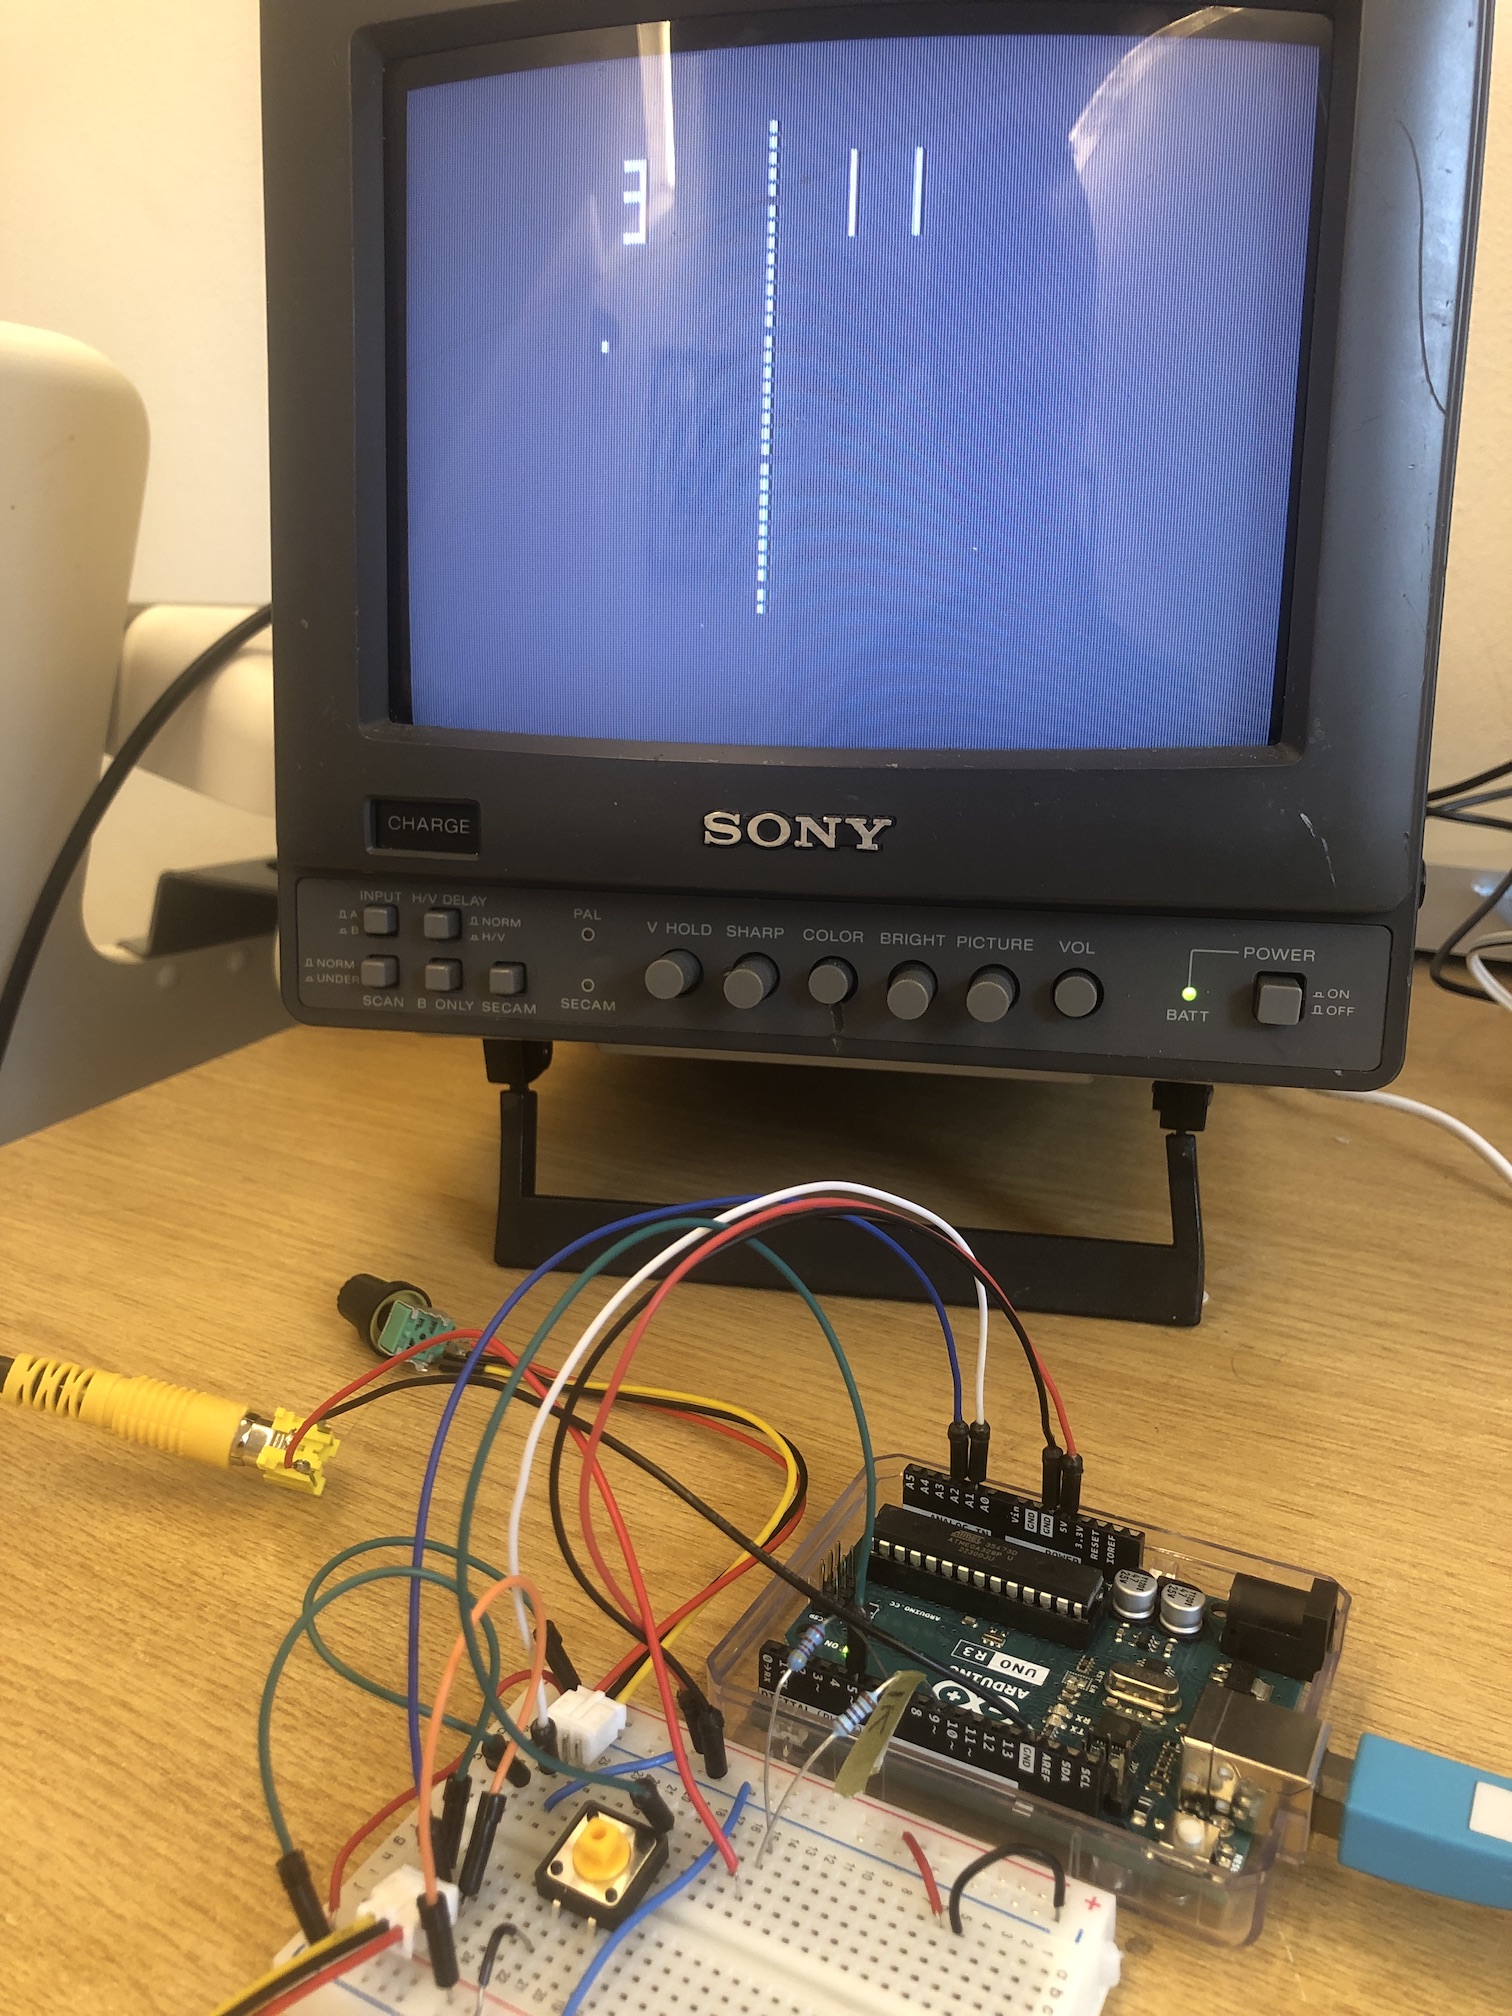 Pong TVout on a breadboard